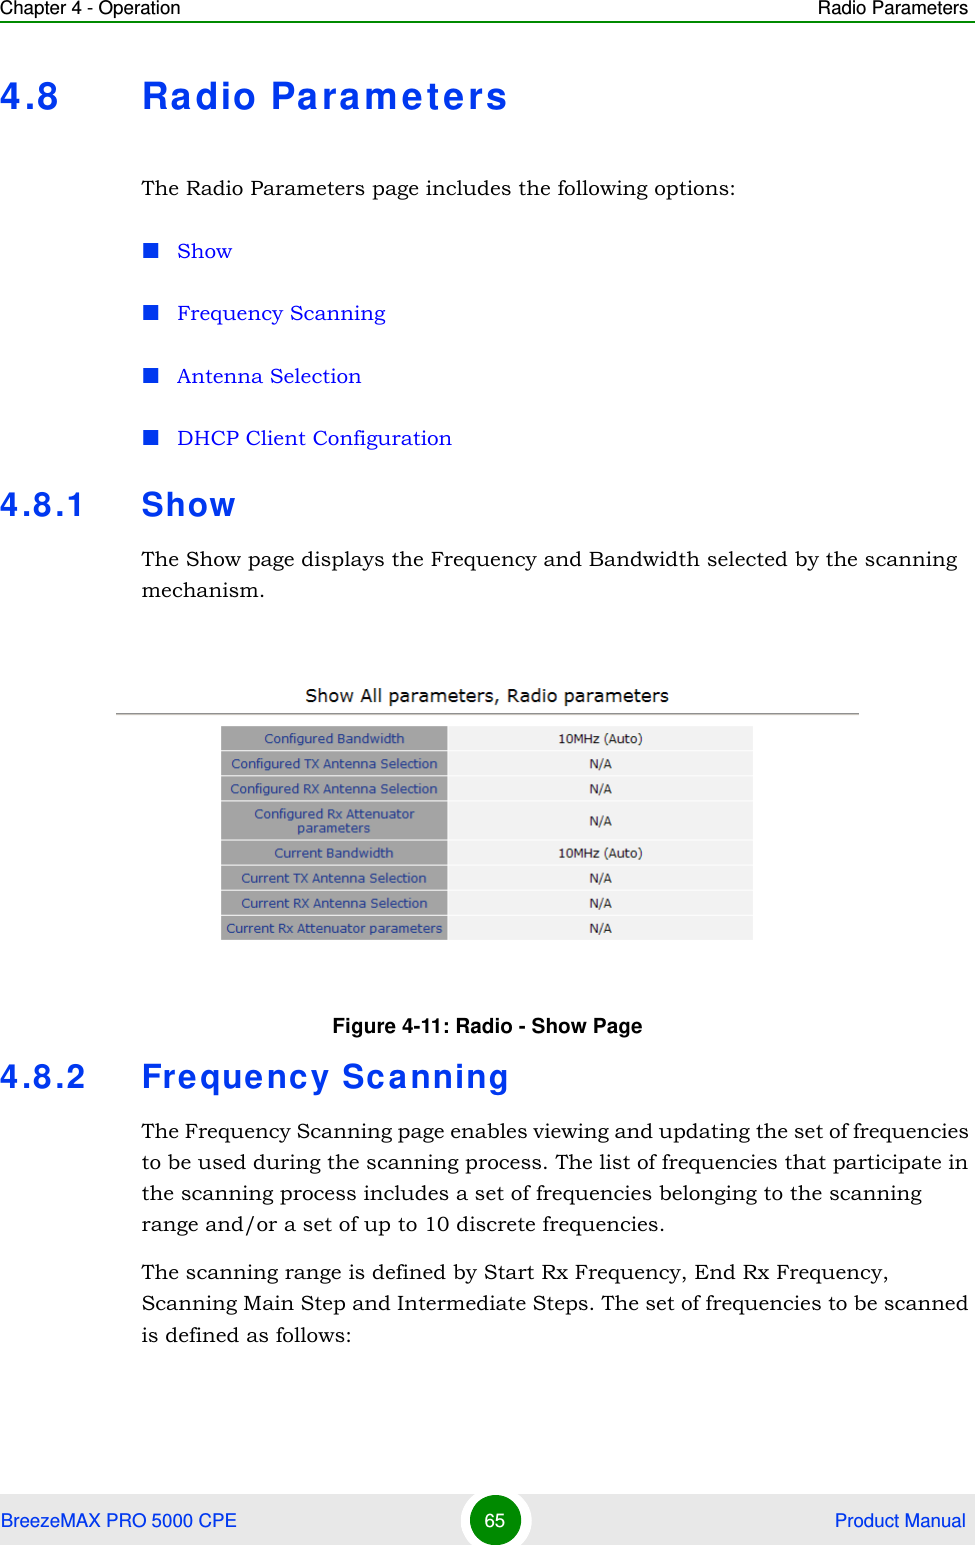 Chapter 4 - Operation Radio ParametersBreezeMAX PRO 5000 CPE 65  Product Manual4.8 Radio ParametersThe Radio Parameters page includes the following options:ShowFrequency ScanningAntenna SelectionDHCP Client Configuration4.8.1 ShowThe Show page displays the Frequency and Bandwidth selected by the scanning mechanism.4.8.2 Frequency ScanningThe Frequency Scanning page enables viewing and updating the set of frequencies to be used during the scanning process. The list of frequencies that participate in the scanning process includes a set of frequencies belonging to the scanning range and/or a set of up to 10 discrete frequencies. The scanning range is defined by Start Rx Frequency, End Rx Frequency, Scanning Main Step and Intermediate Steps. The set of frequencies to be scanned is defined as follows:Figure 4-11: Radio - Show Page